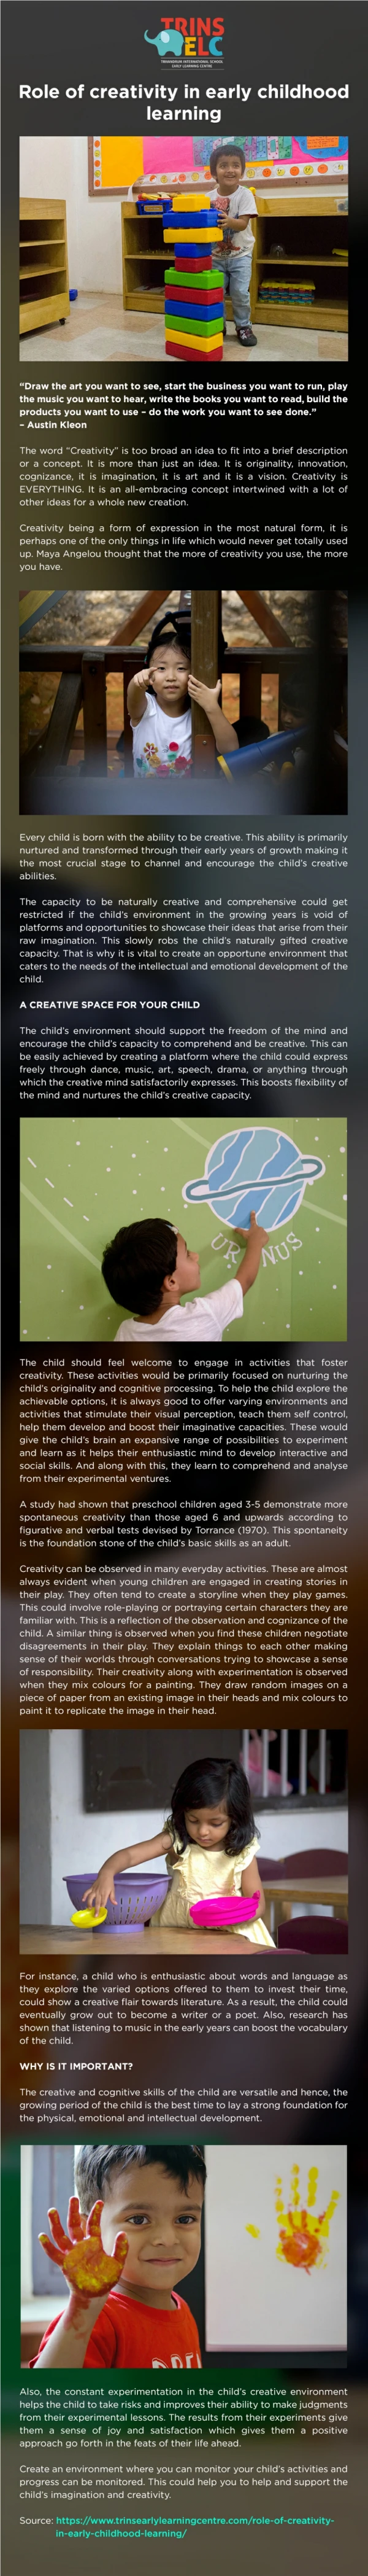 Role of Creativity in Early Childhood Learning | Trins ELC